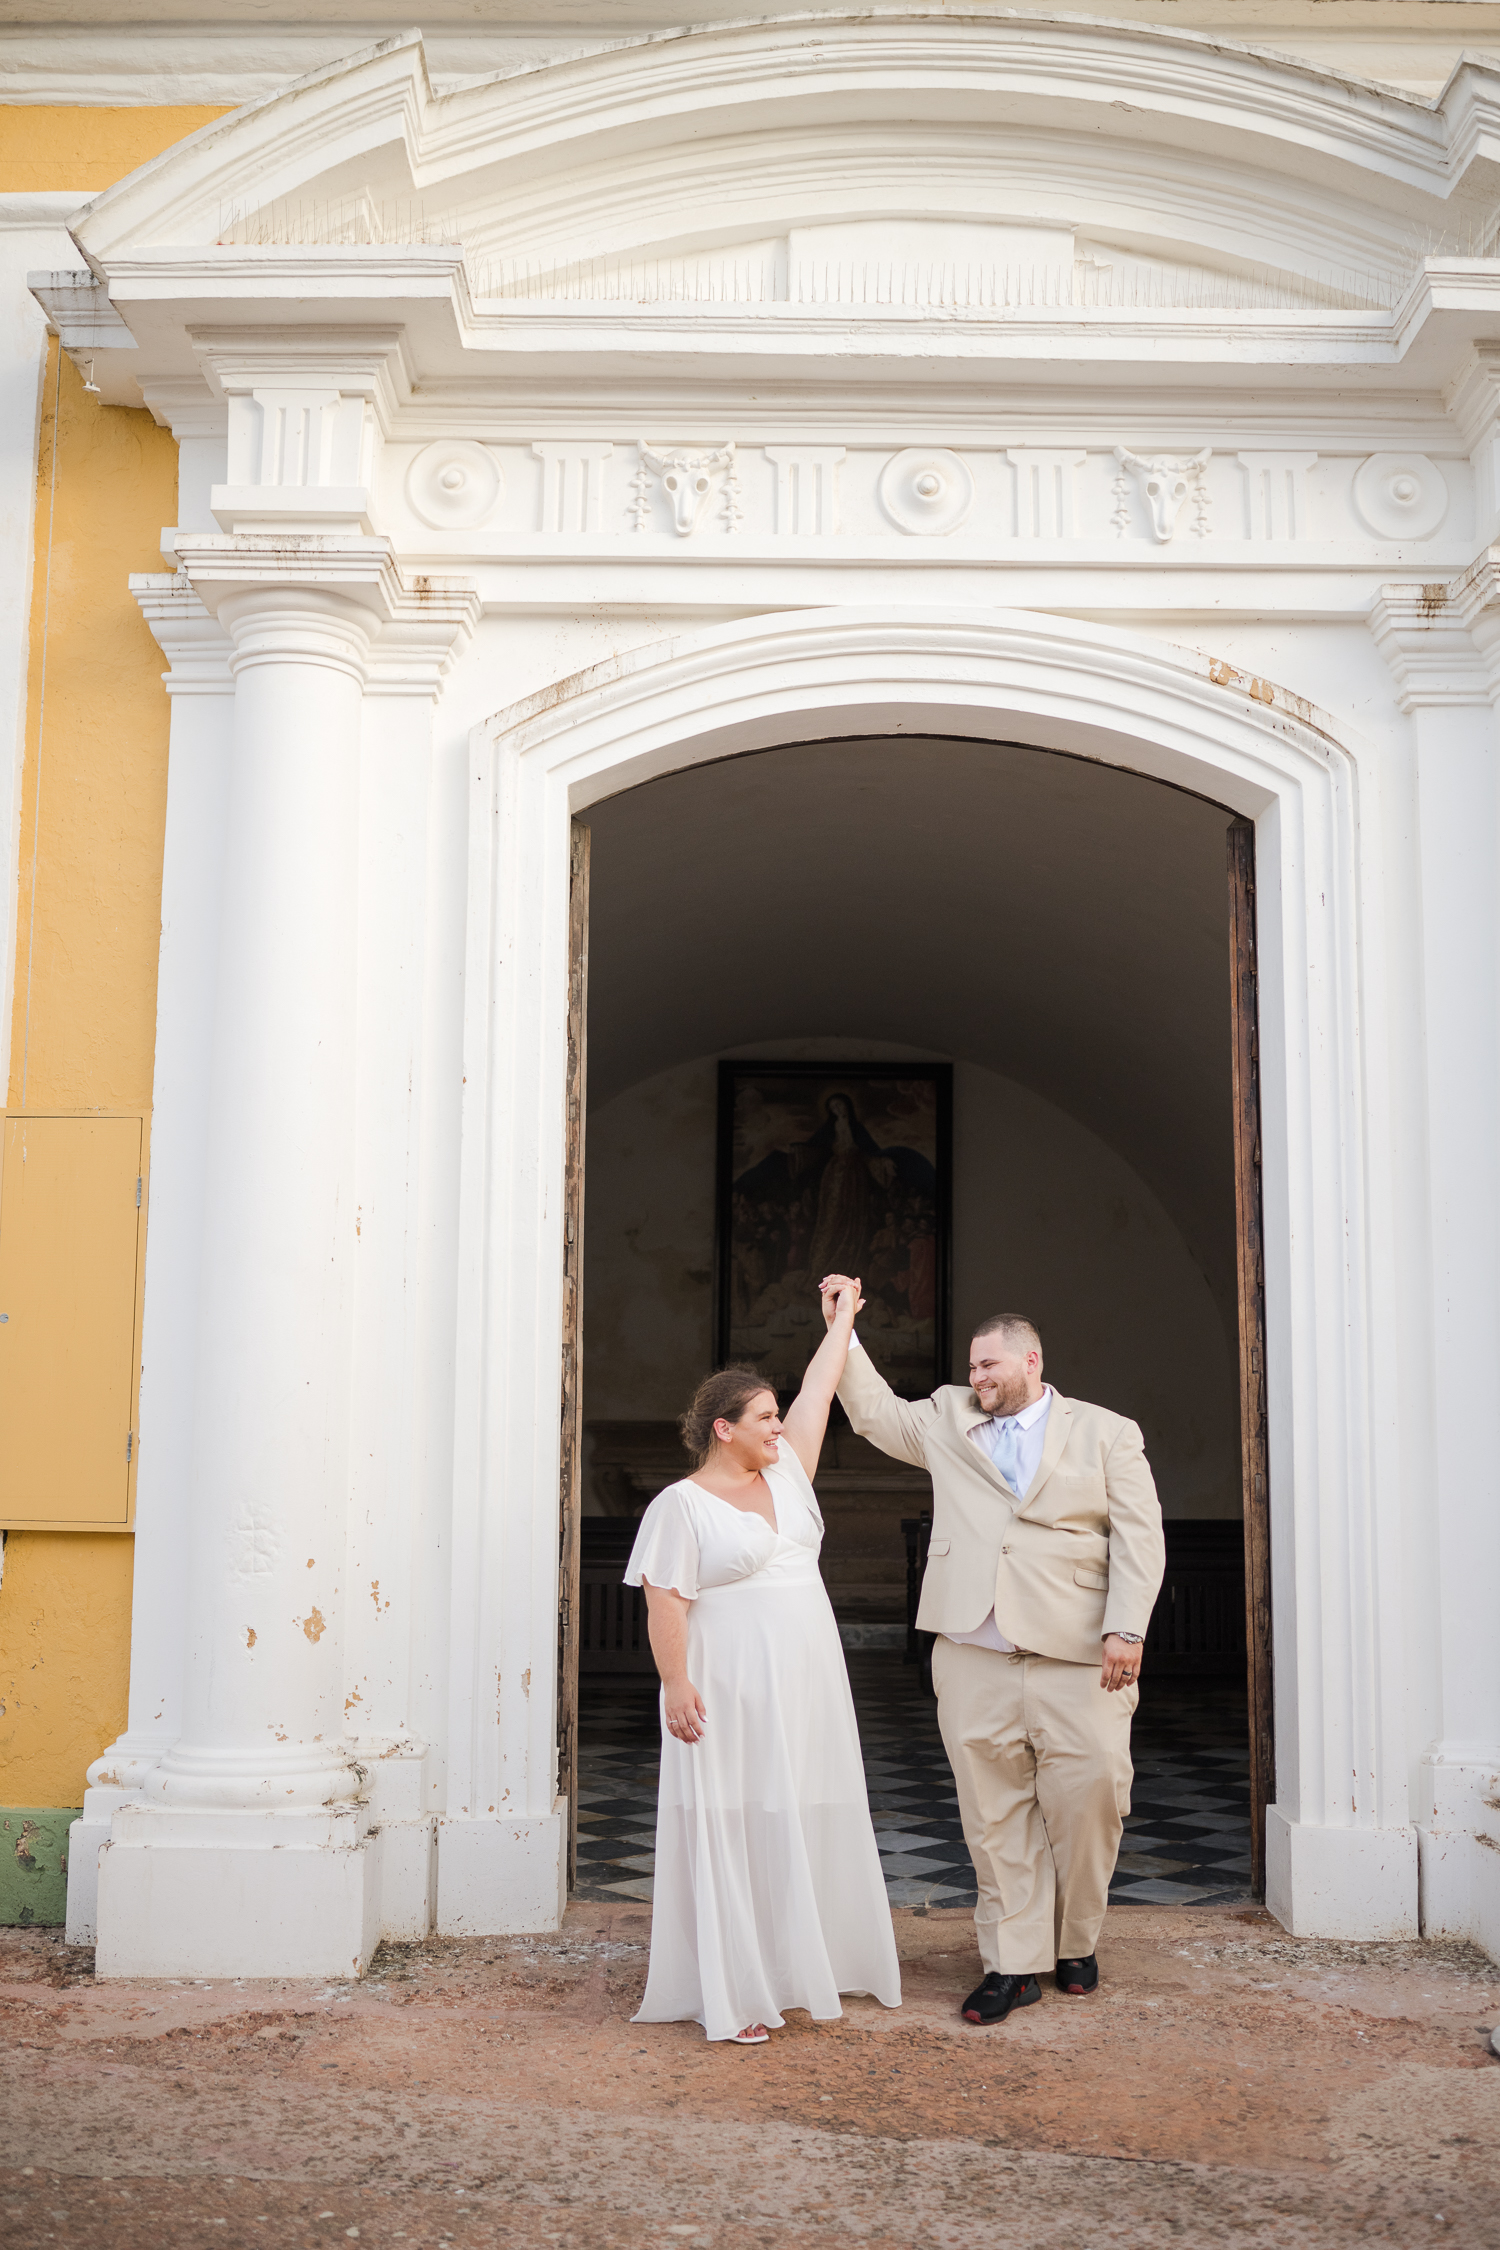 elopement photography at El Morro fortress in Old San Juan by Puerto Rico wedding photographer Camille Fontanez